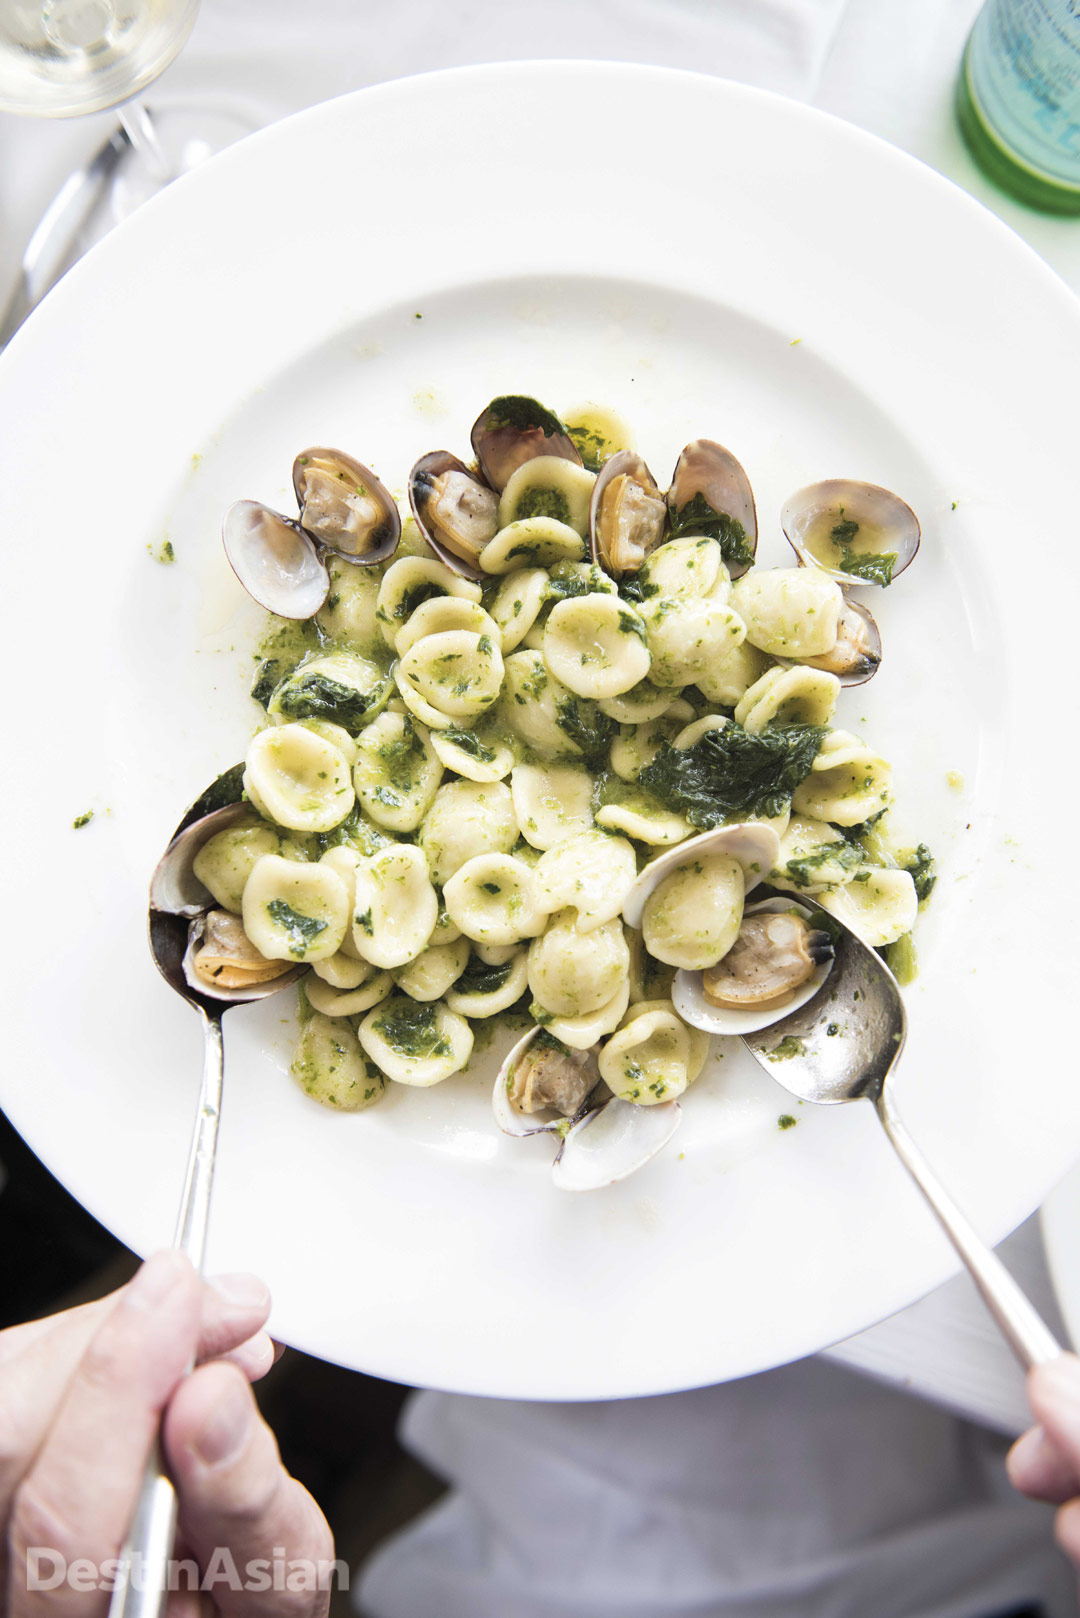 Puglia’s signature “little ears” pasta—with turnip greens and clams.